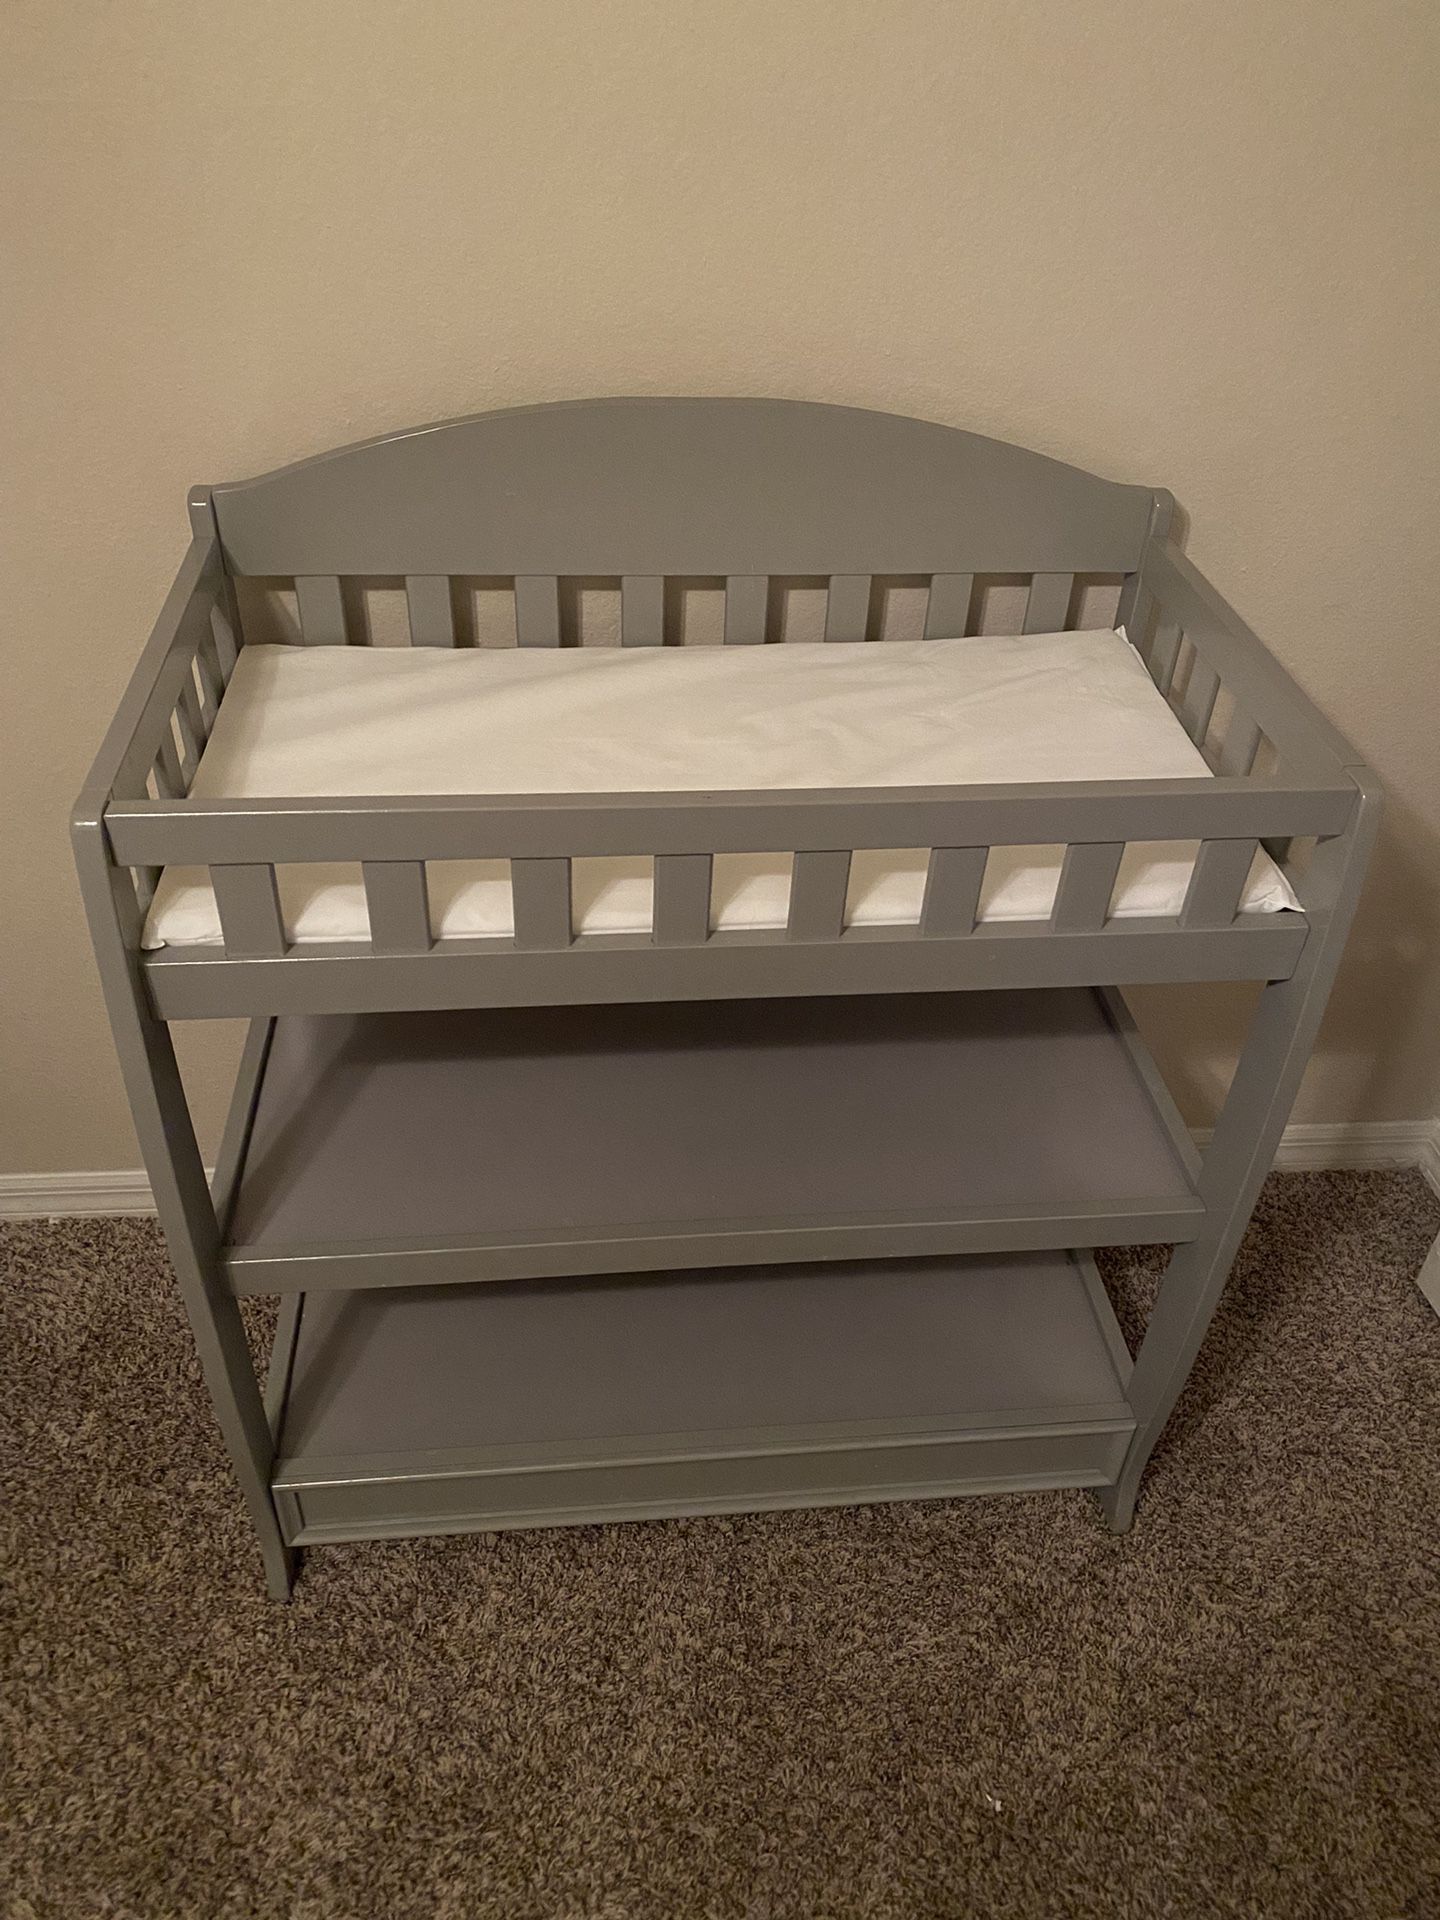 Infant Gray Changing Table 